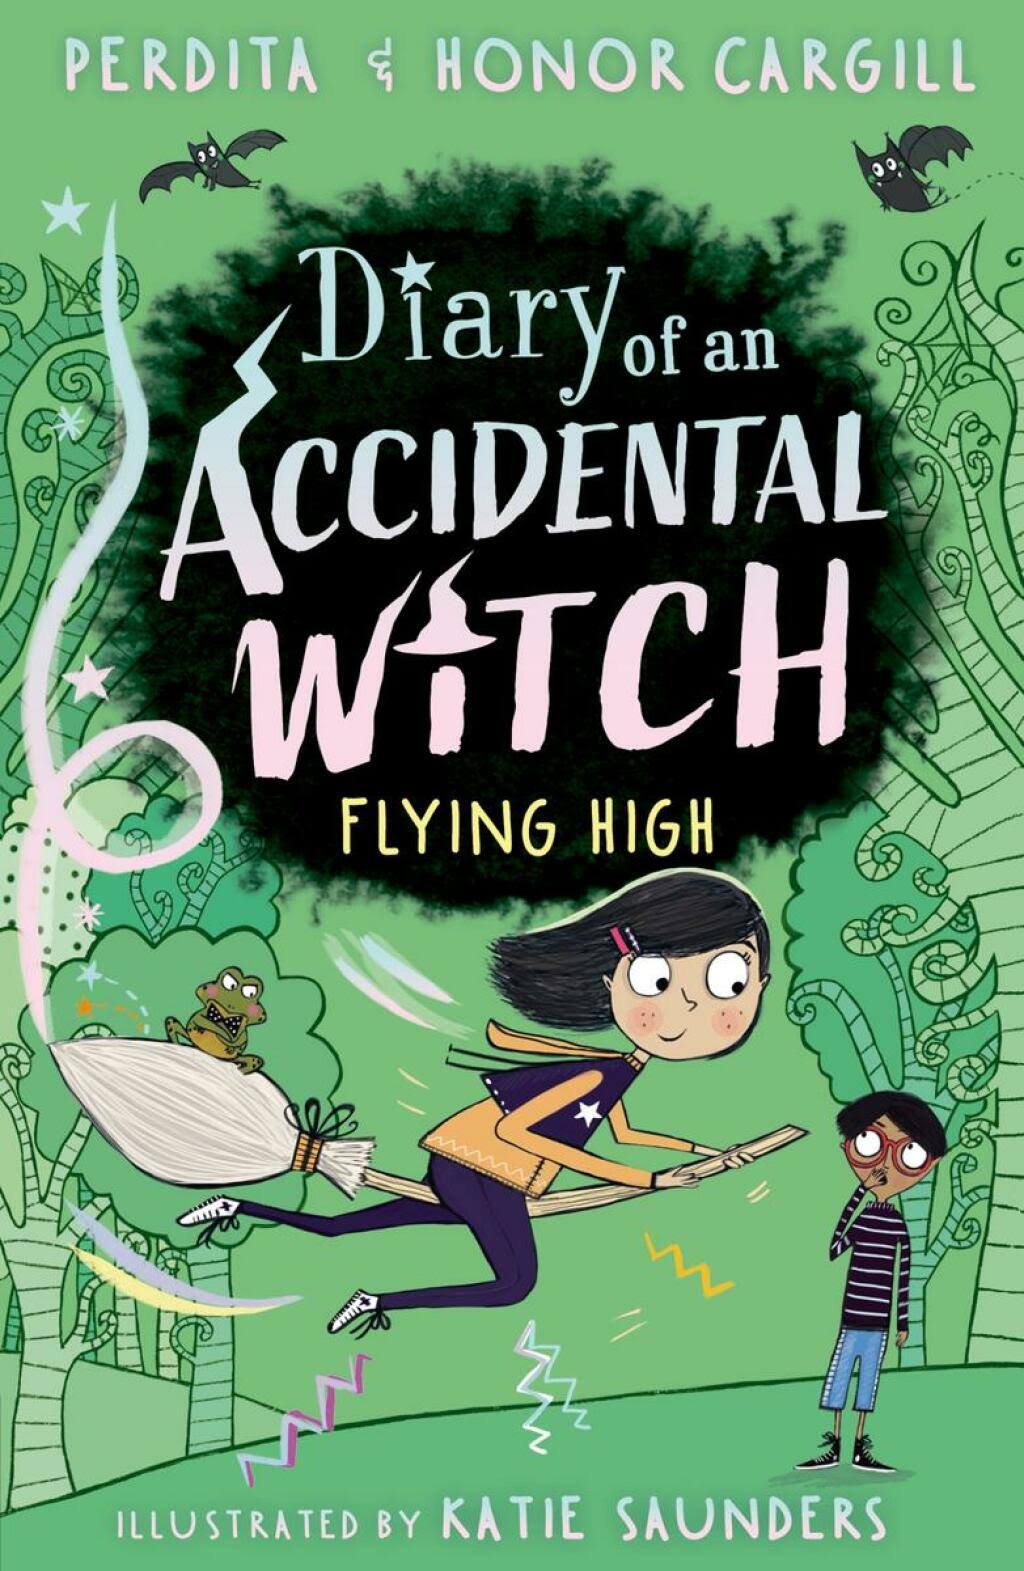 Diary of an Accidental Witch: Flying High [Book]